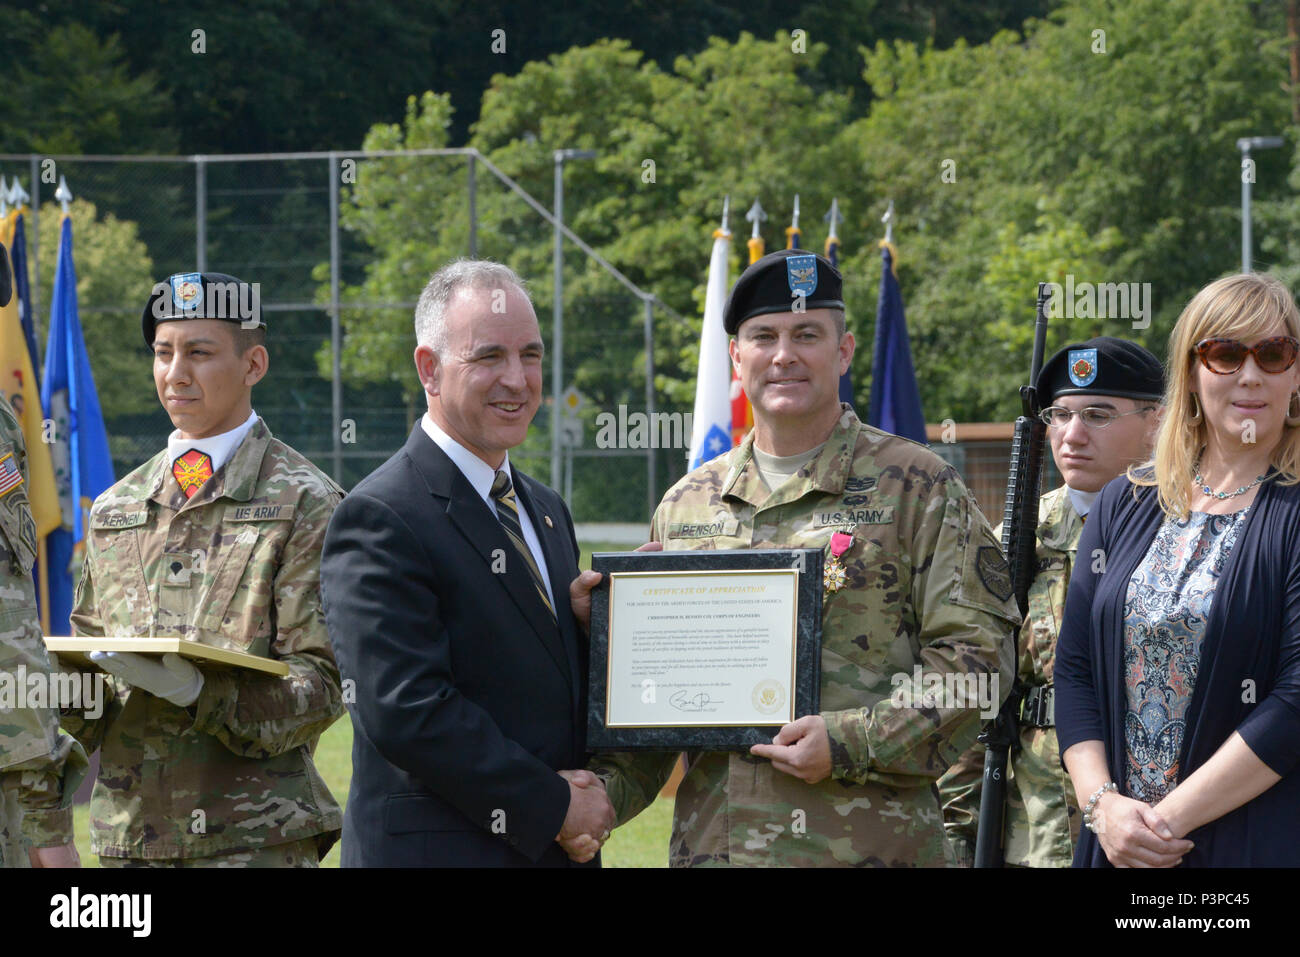 ANSBACH, Germany (July 21, 2016) – Michael D. Formica, director of Installation Management Command – Europe, thanks Col. Christopher M. Benson, outgoing commander of U.S. Army Garrison Ansbach, for Benson’s service and performance. Benson’s retirement ceremony followed the USAG Ansbach change of command Monday at Barton Barracks here.. Stock Photo